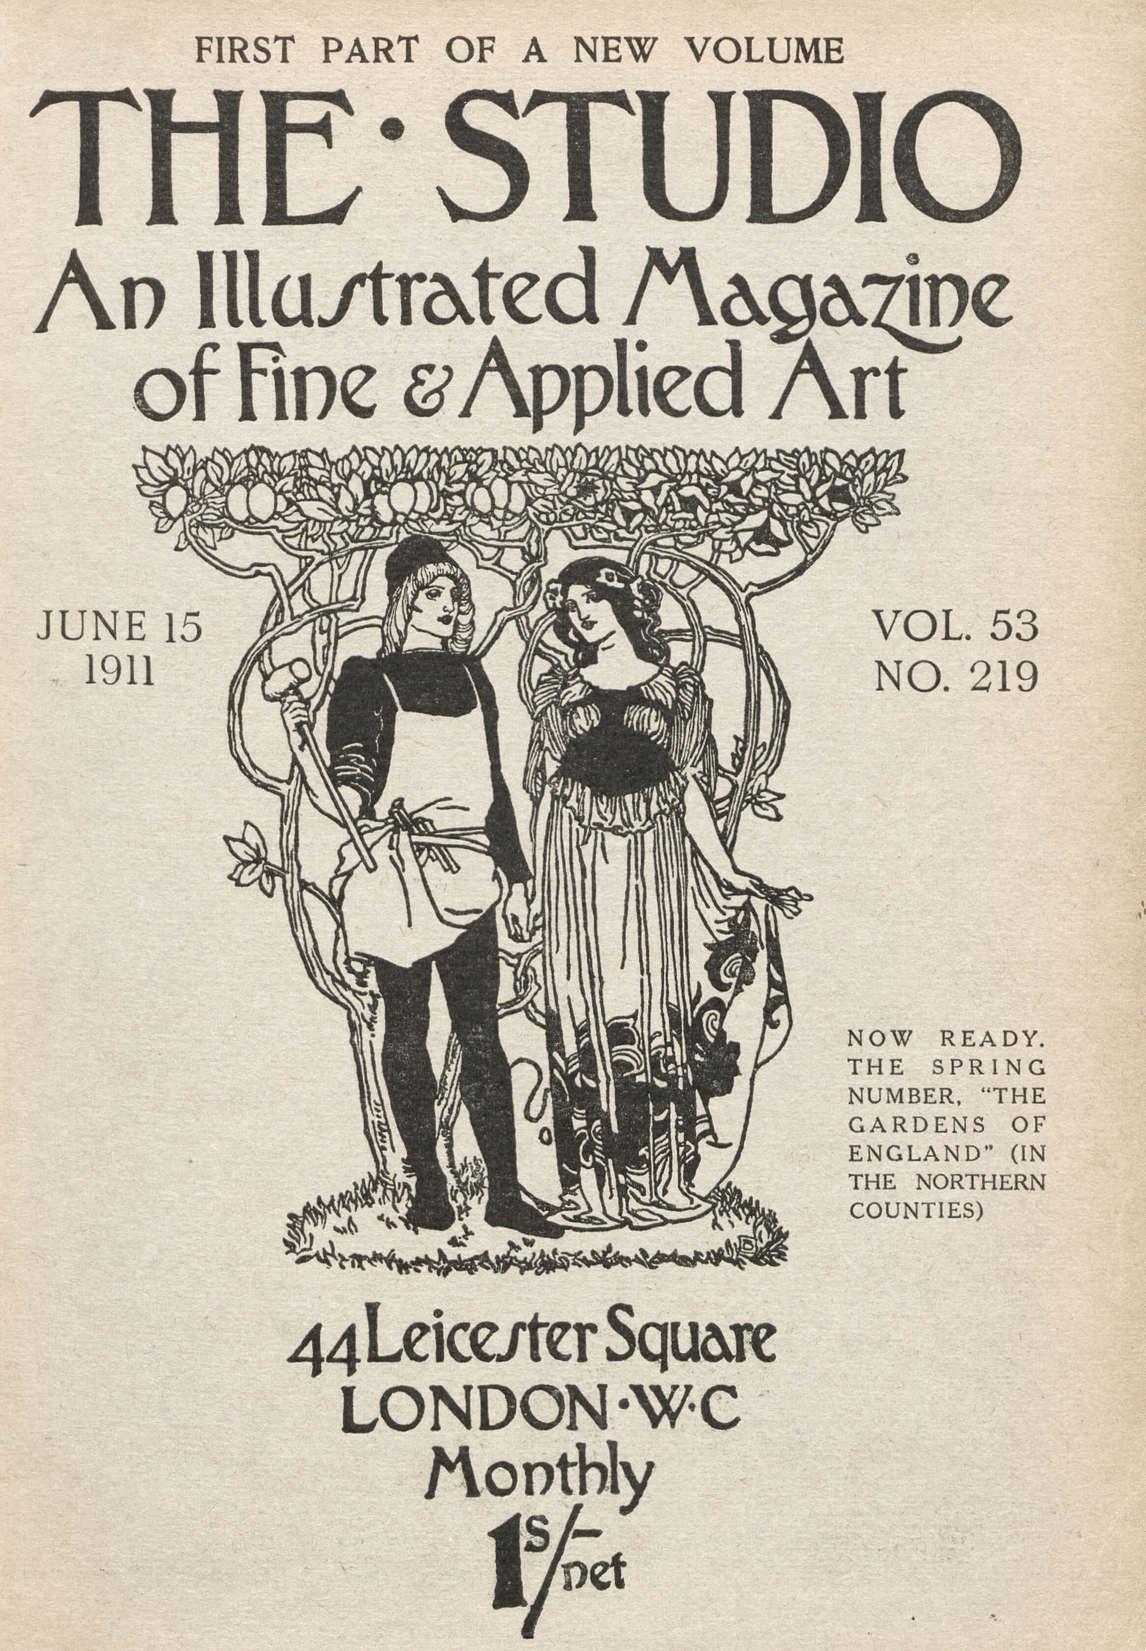 Art Canada Institute, Cover of The Studio: An Illustrated Magazine of Fine & Applied Art 53, no. 219 (June 15, 1911)